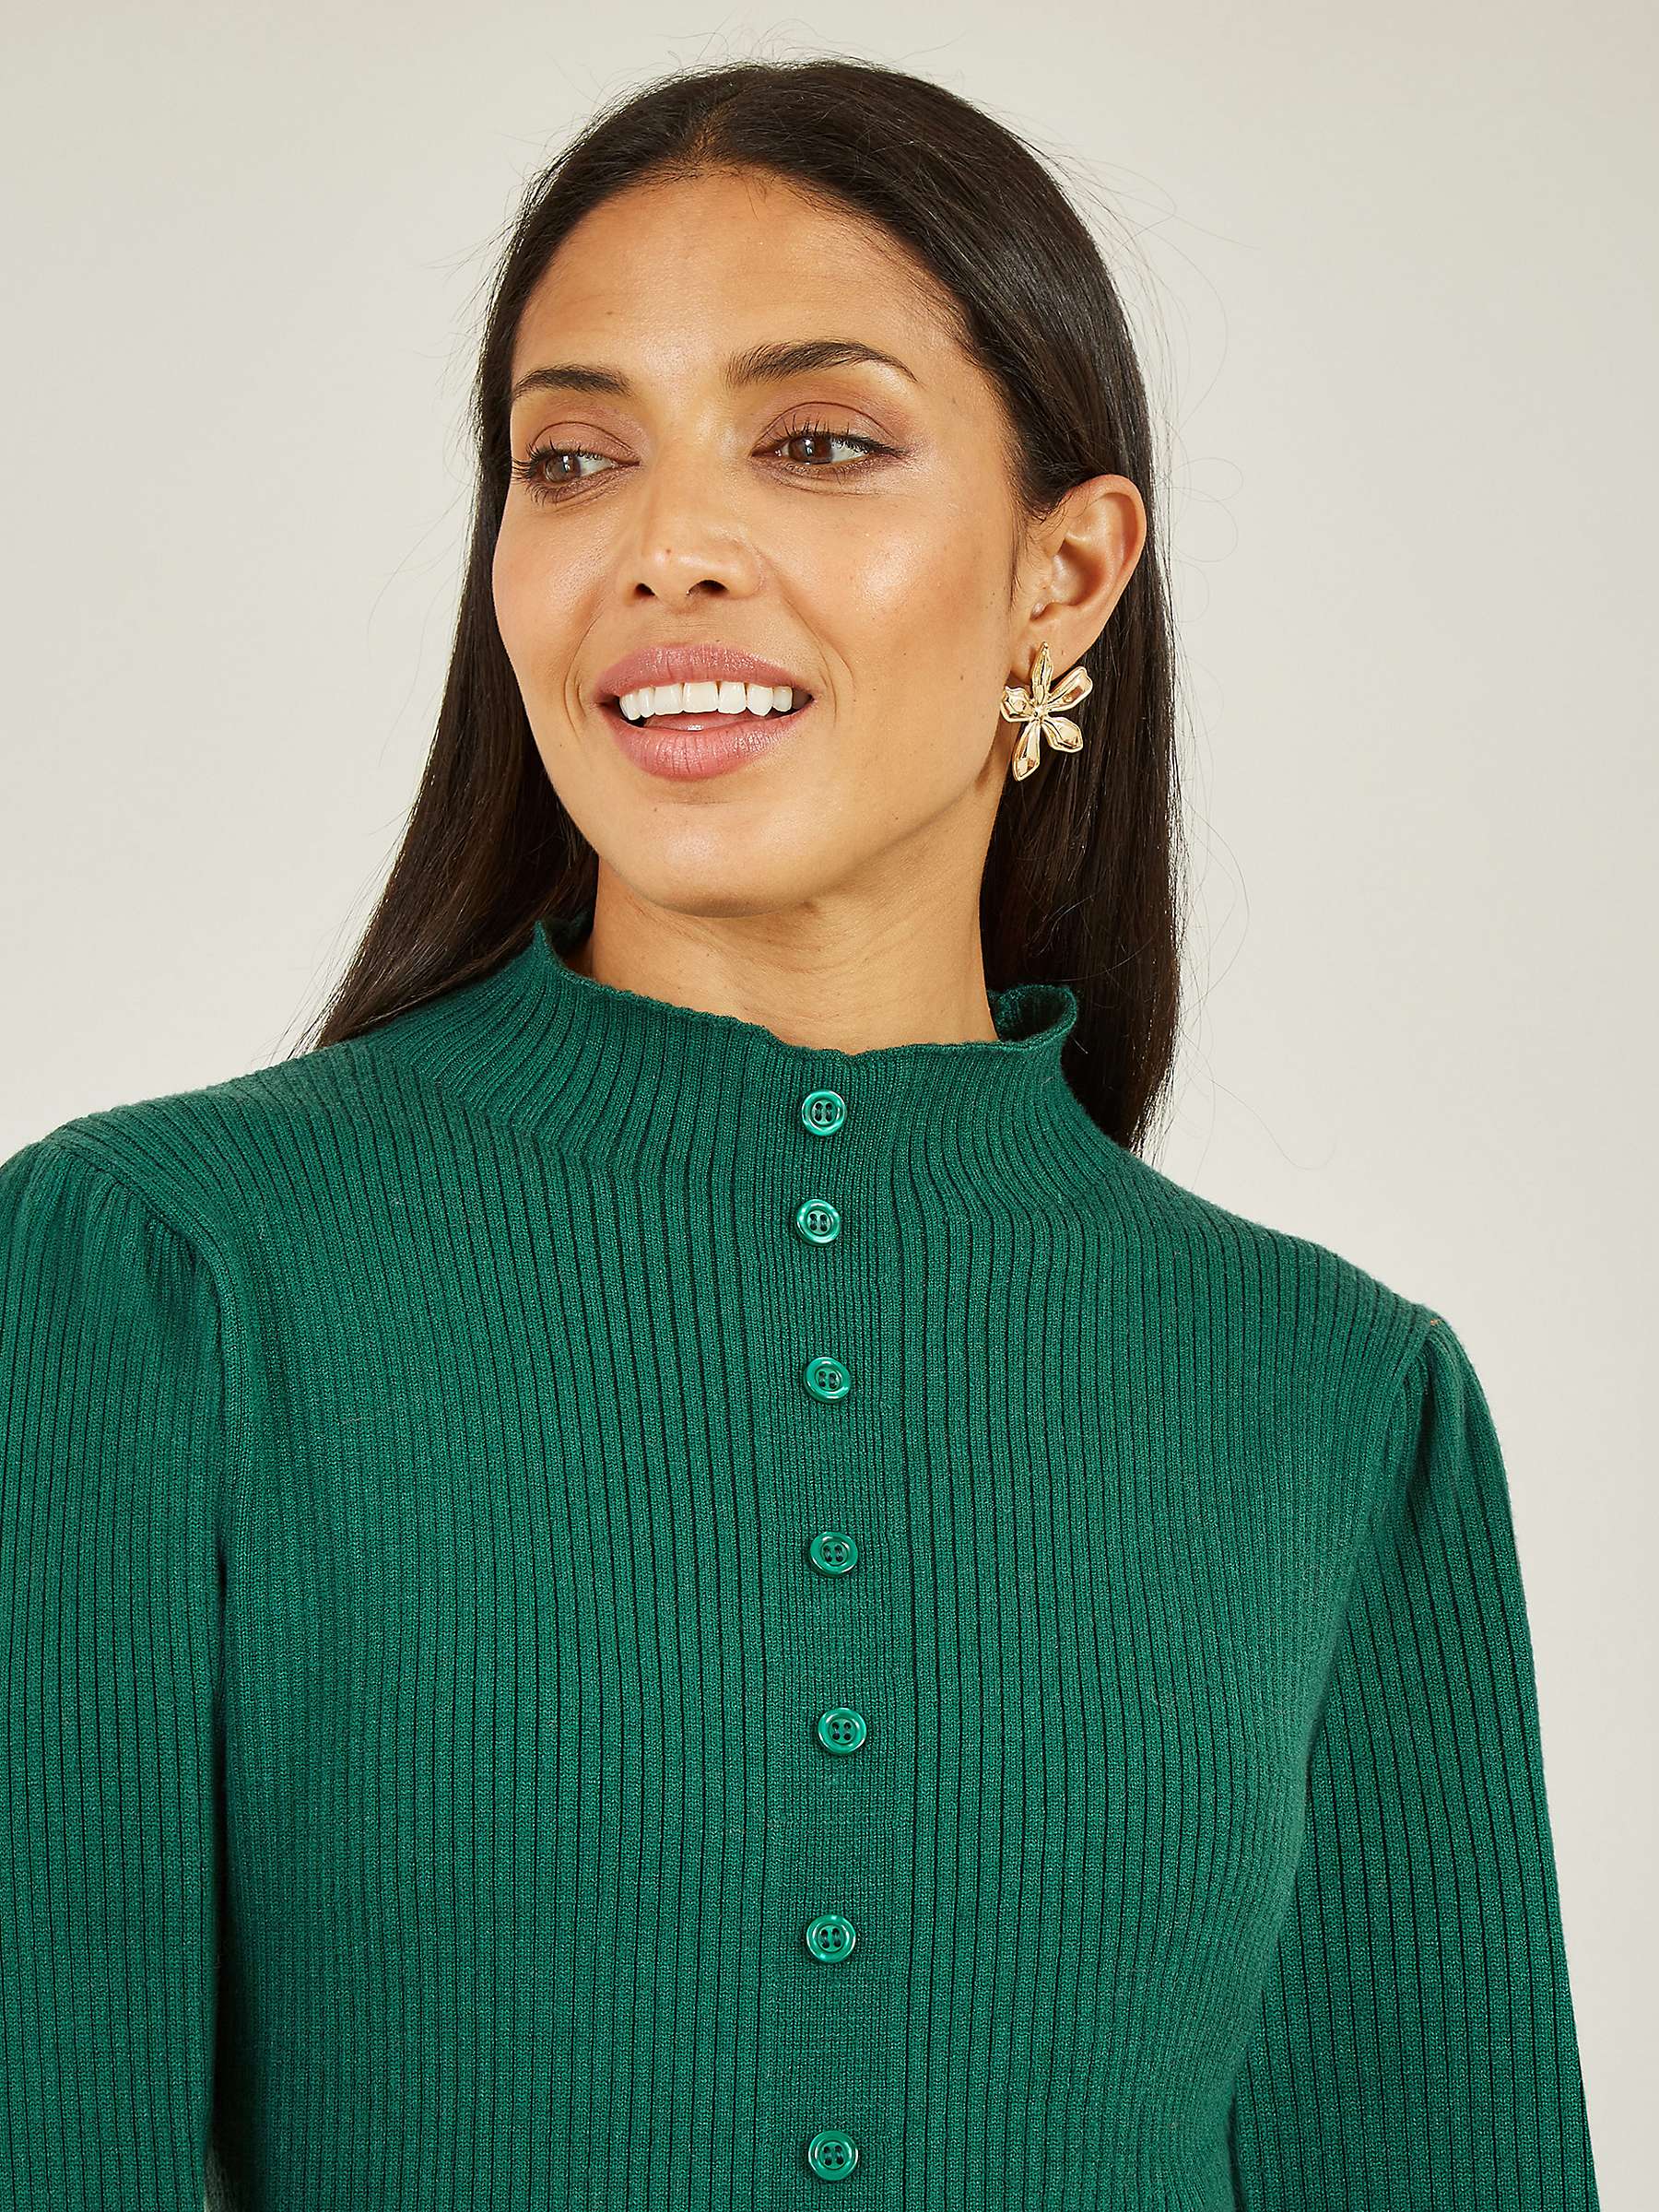 Buy Yumi Knitted Button Up Knee Length Dress, Green Online at johnlewis.com